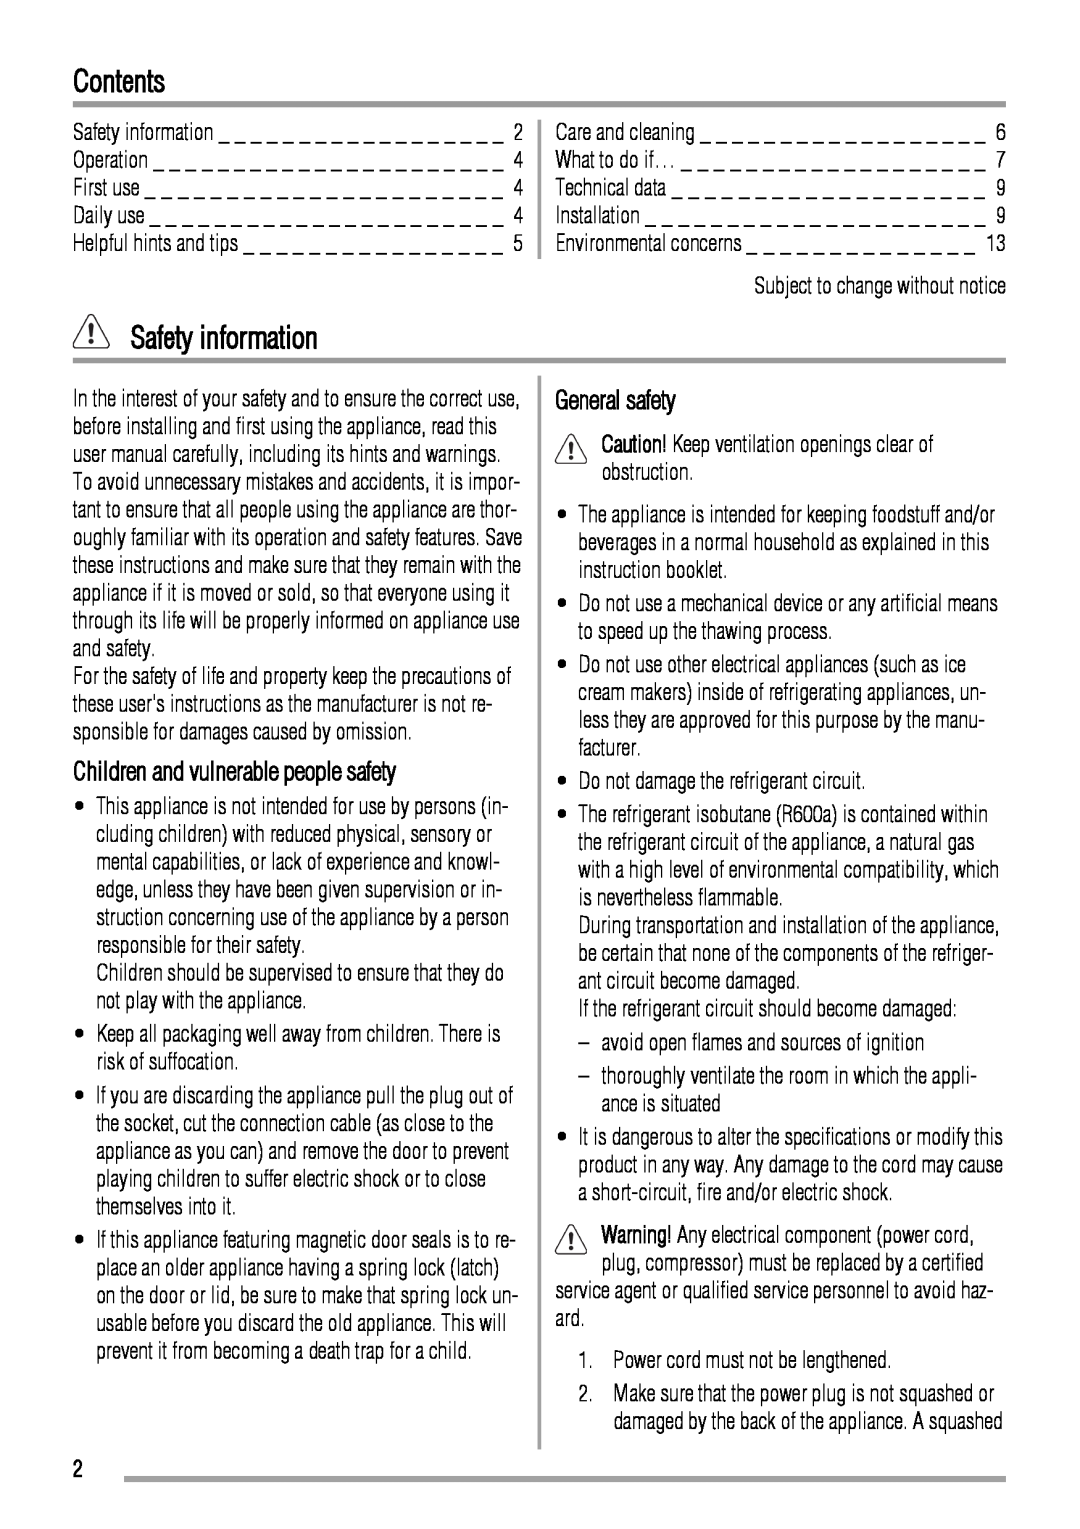 Zanussi ZBB6284 user manual Contents, Safety information, Children and vulnerable people safety, General safety 